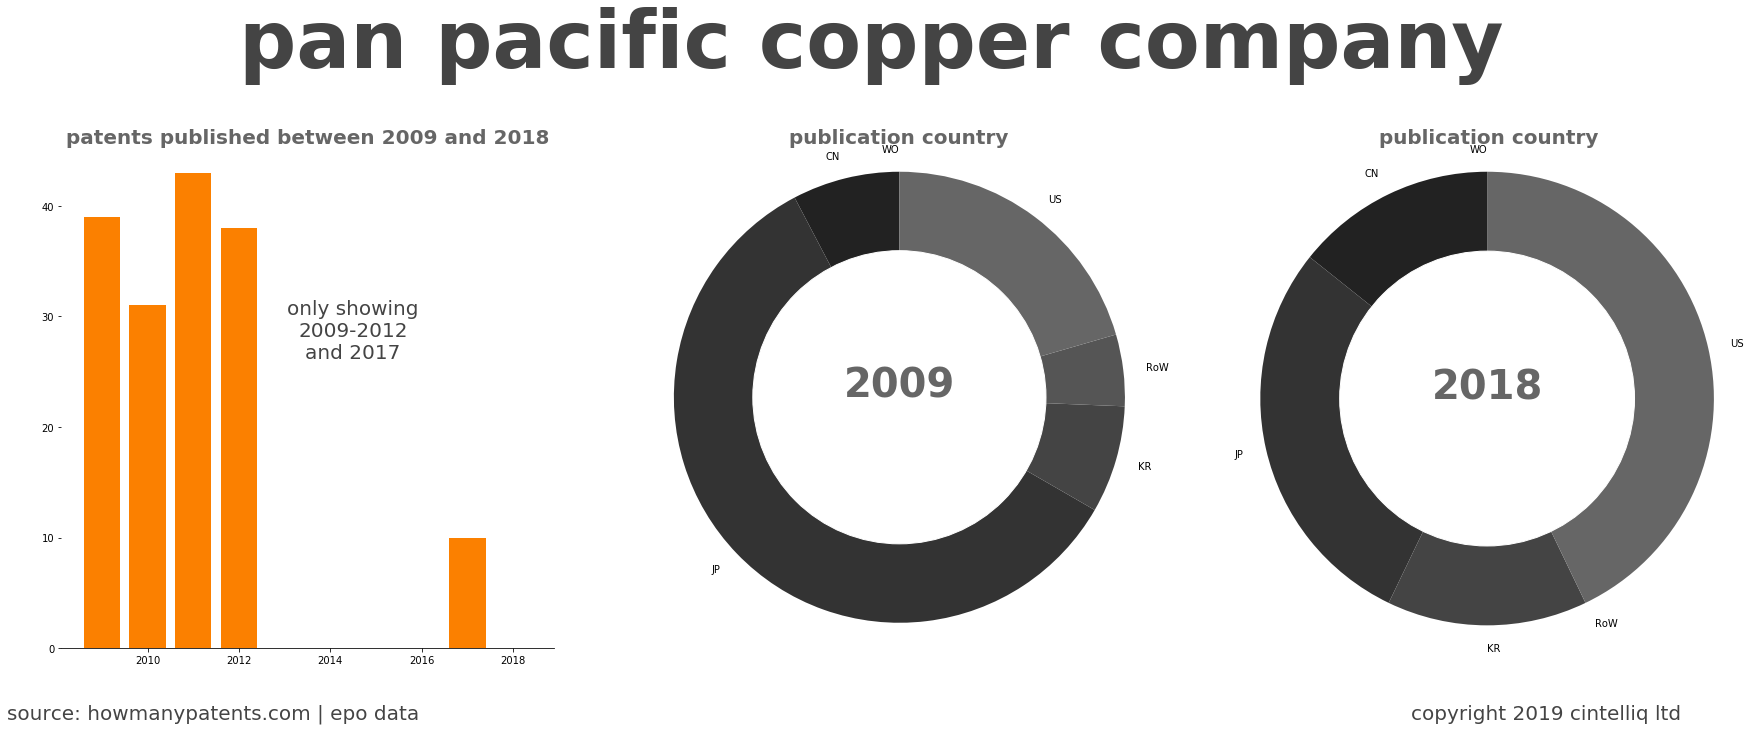 summary of patents for Pan Pacific Copper Company